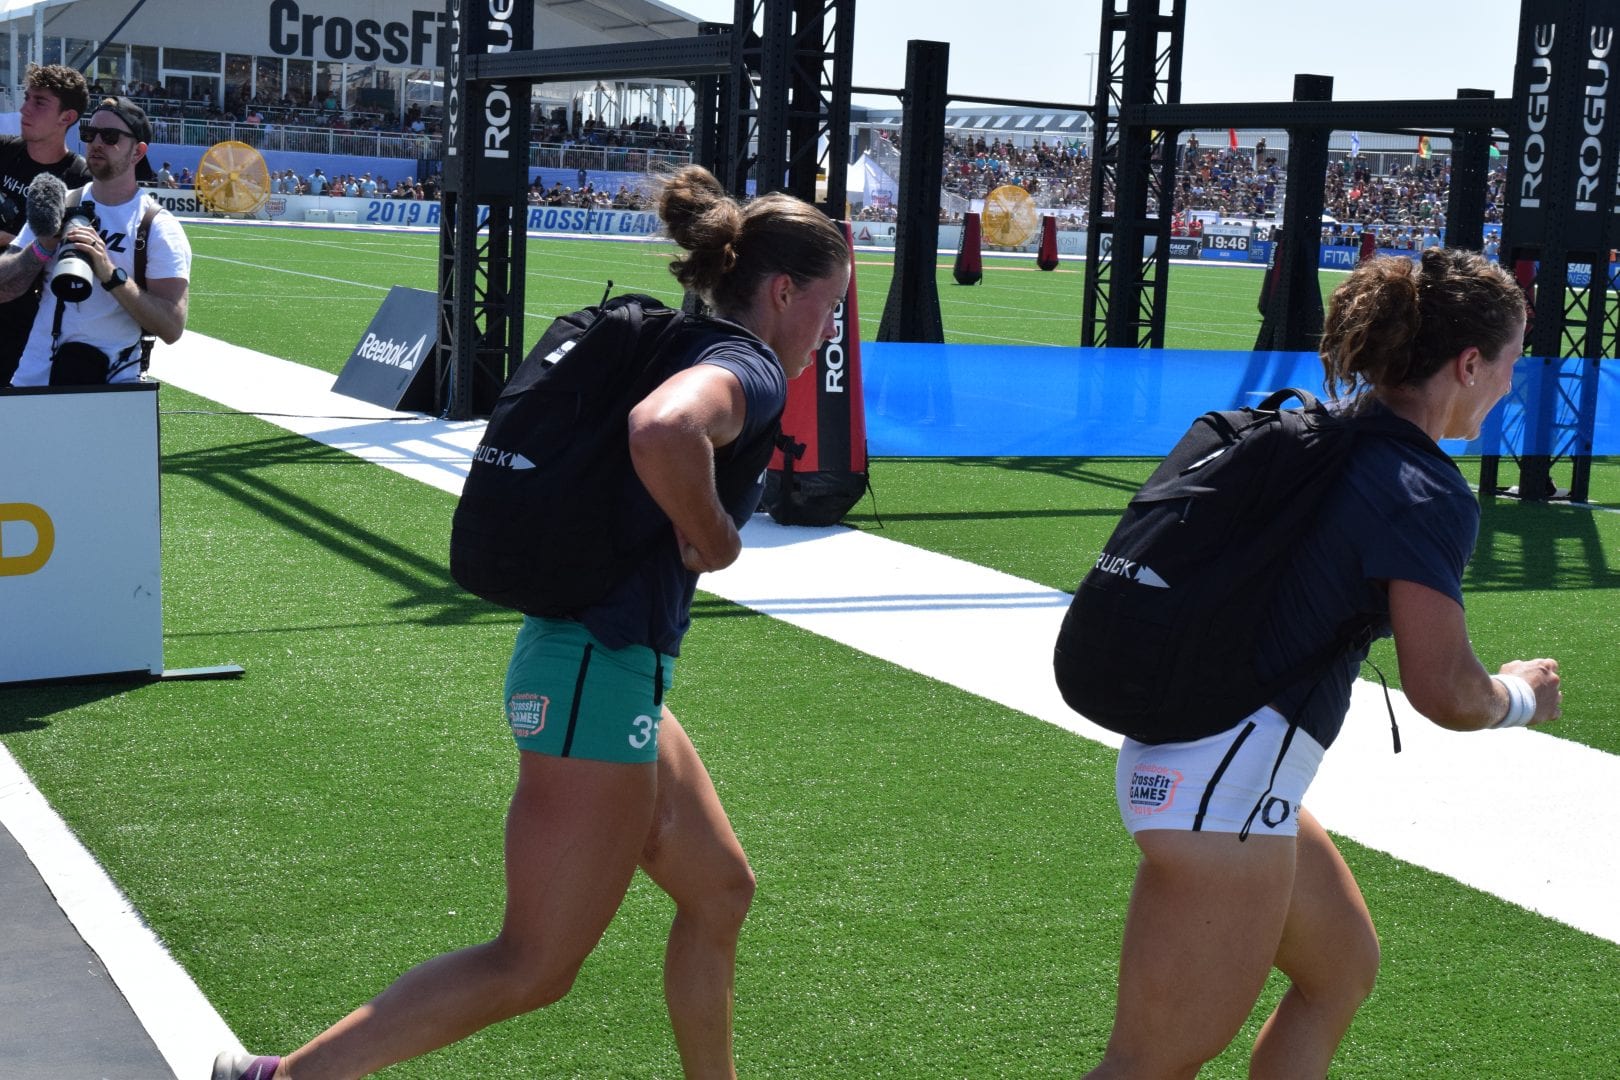 Emily Rolfe completes the Ruck Run event at the 2019 CrossFit Games